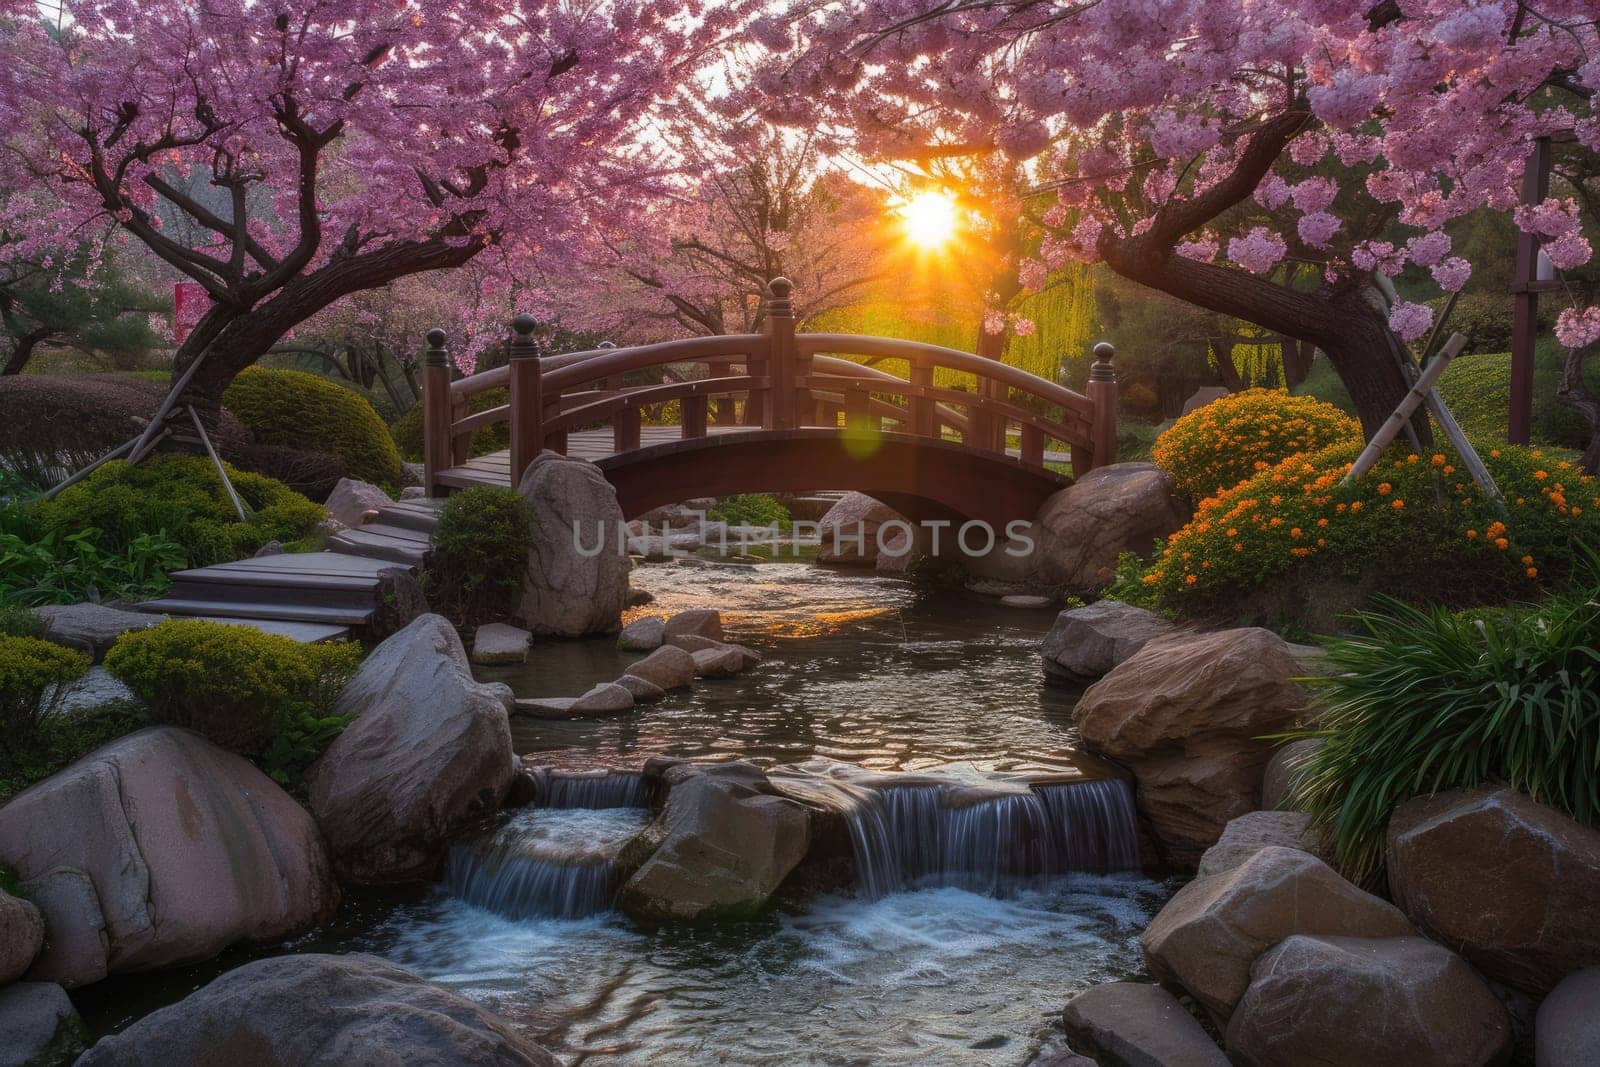 A serene Zen garden at sunrise, with a gently flowing stream, cherry blossoms in full bloom, and a quaint wooden bridge. Resplendent.